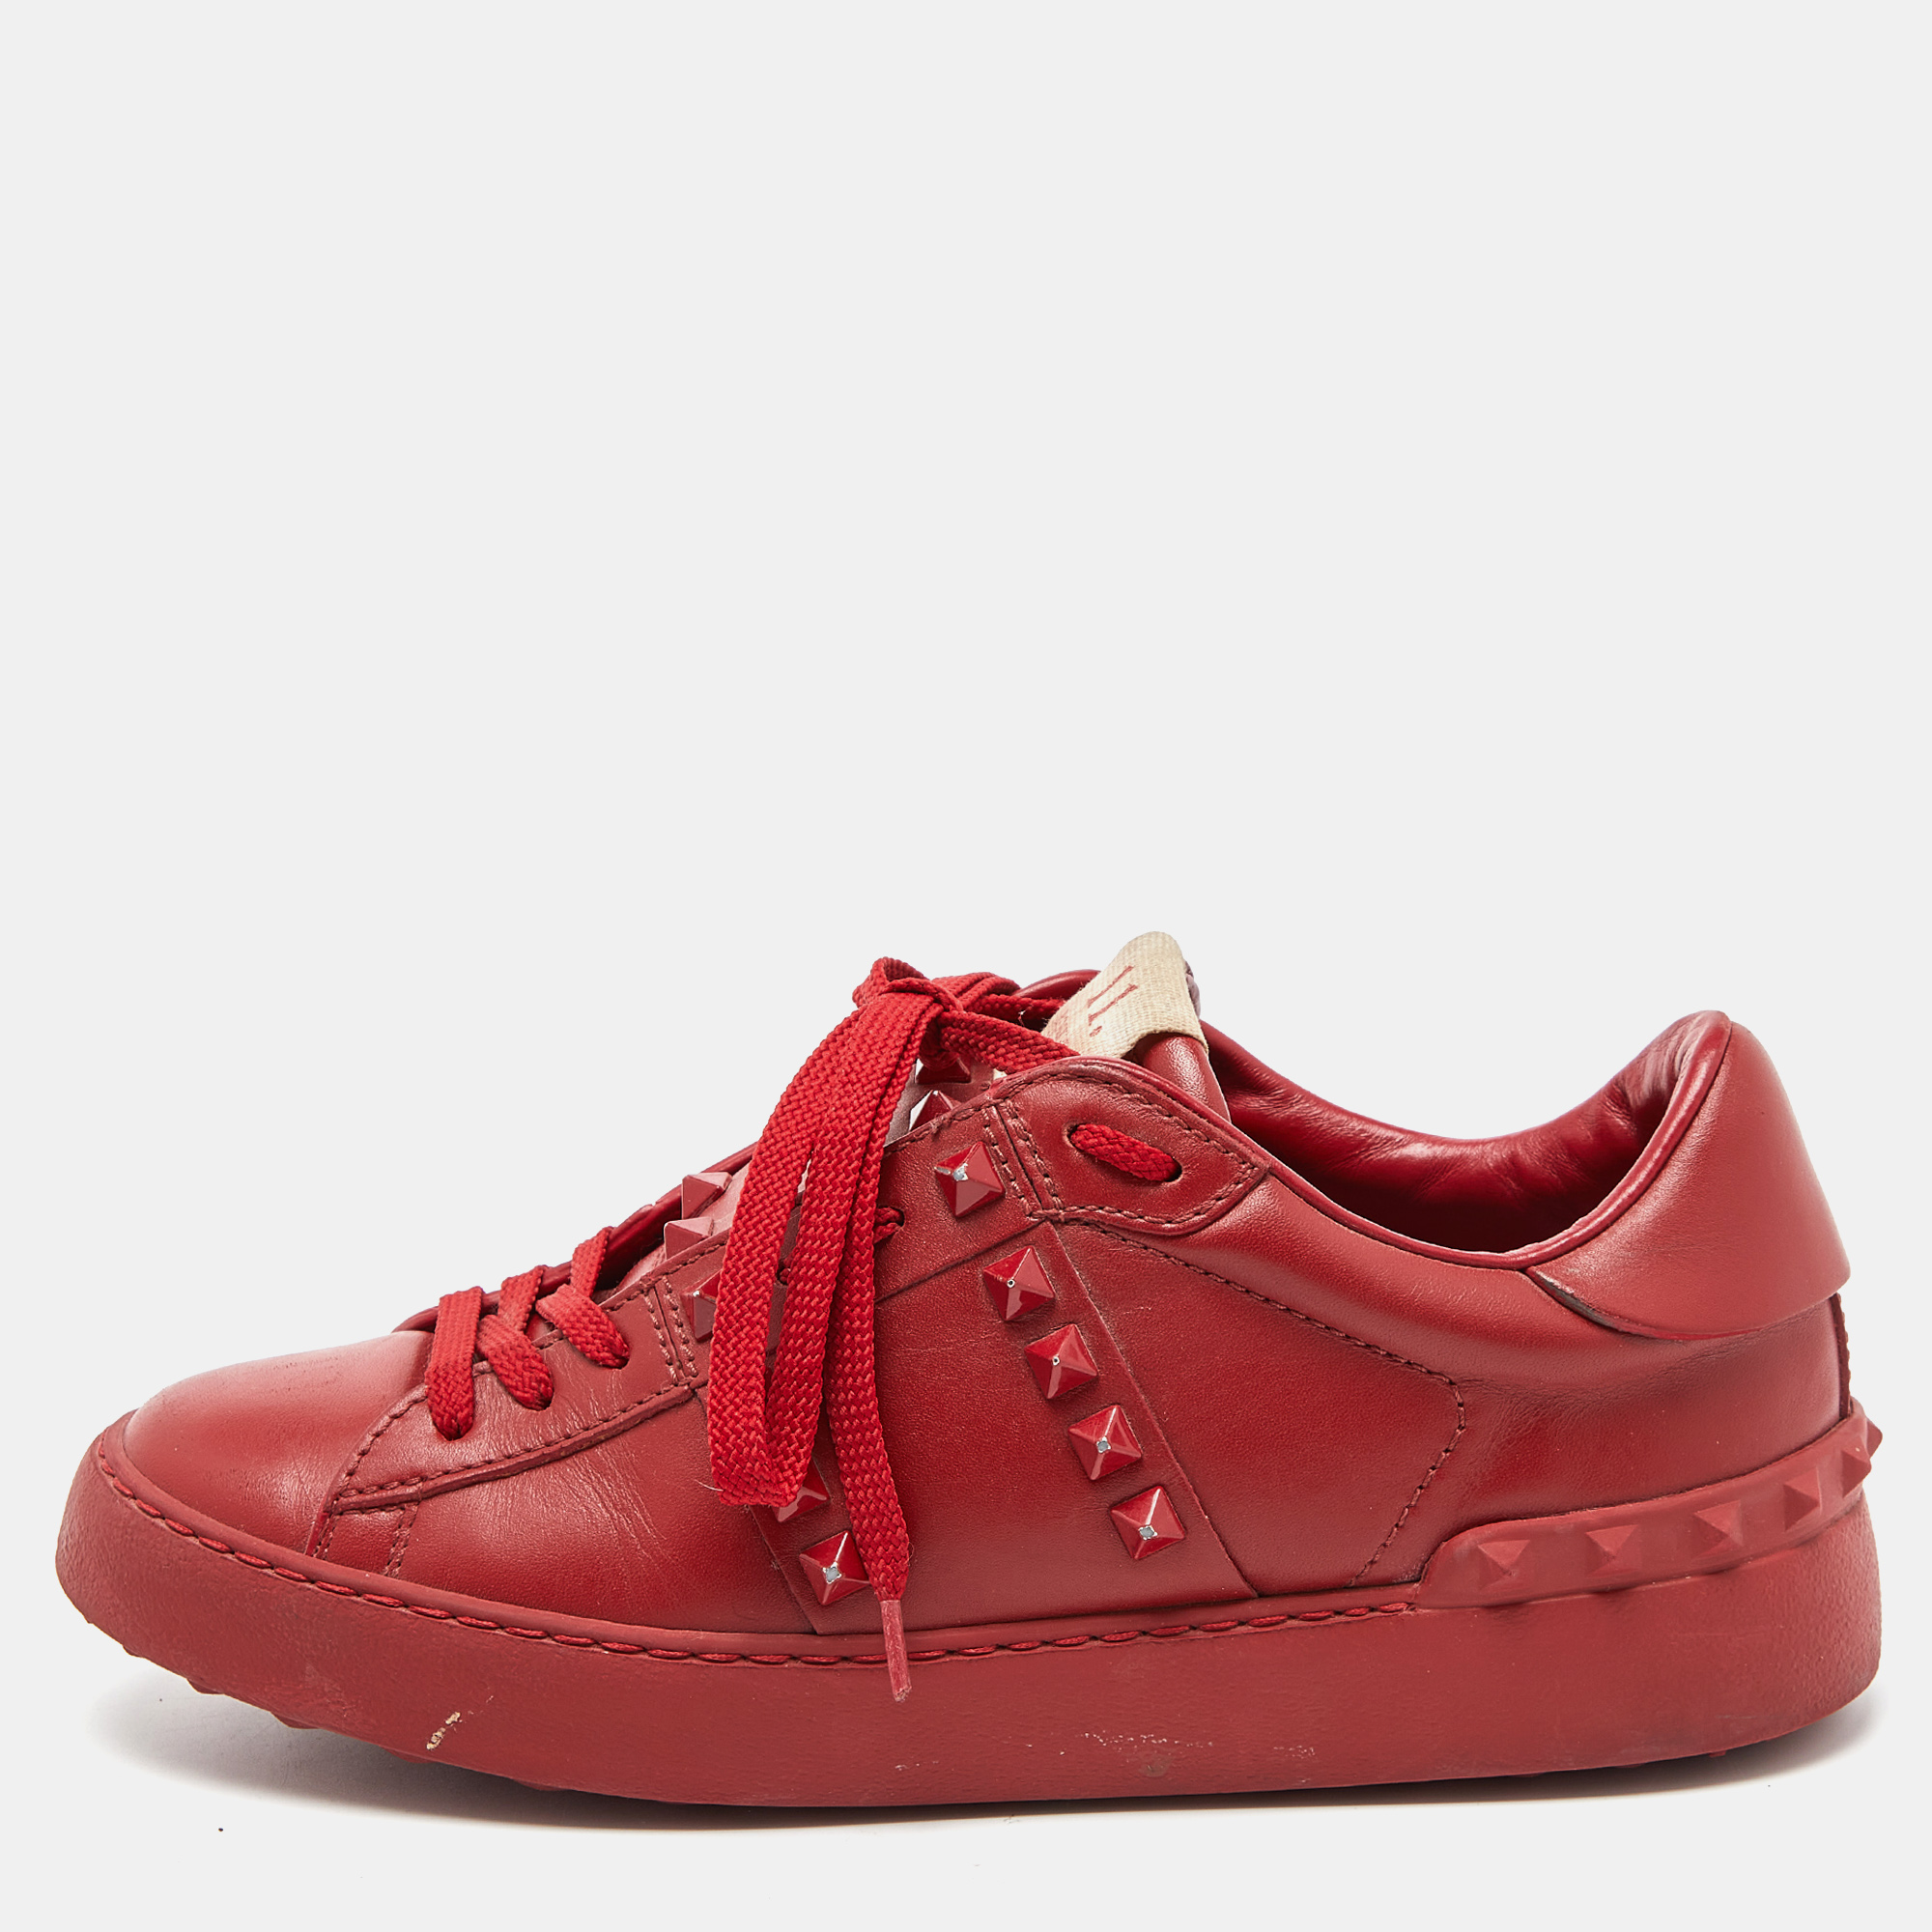 Make a case for luxe style when you step out wearing these Valentino Rockstud Untitled low top sneakers with your casuals. Crafted in red leather with the signature Rockstud trims these lace up shoes are easy to wear.